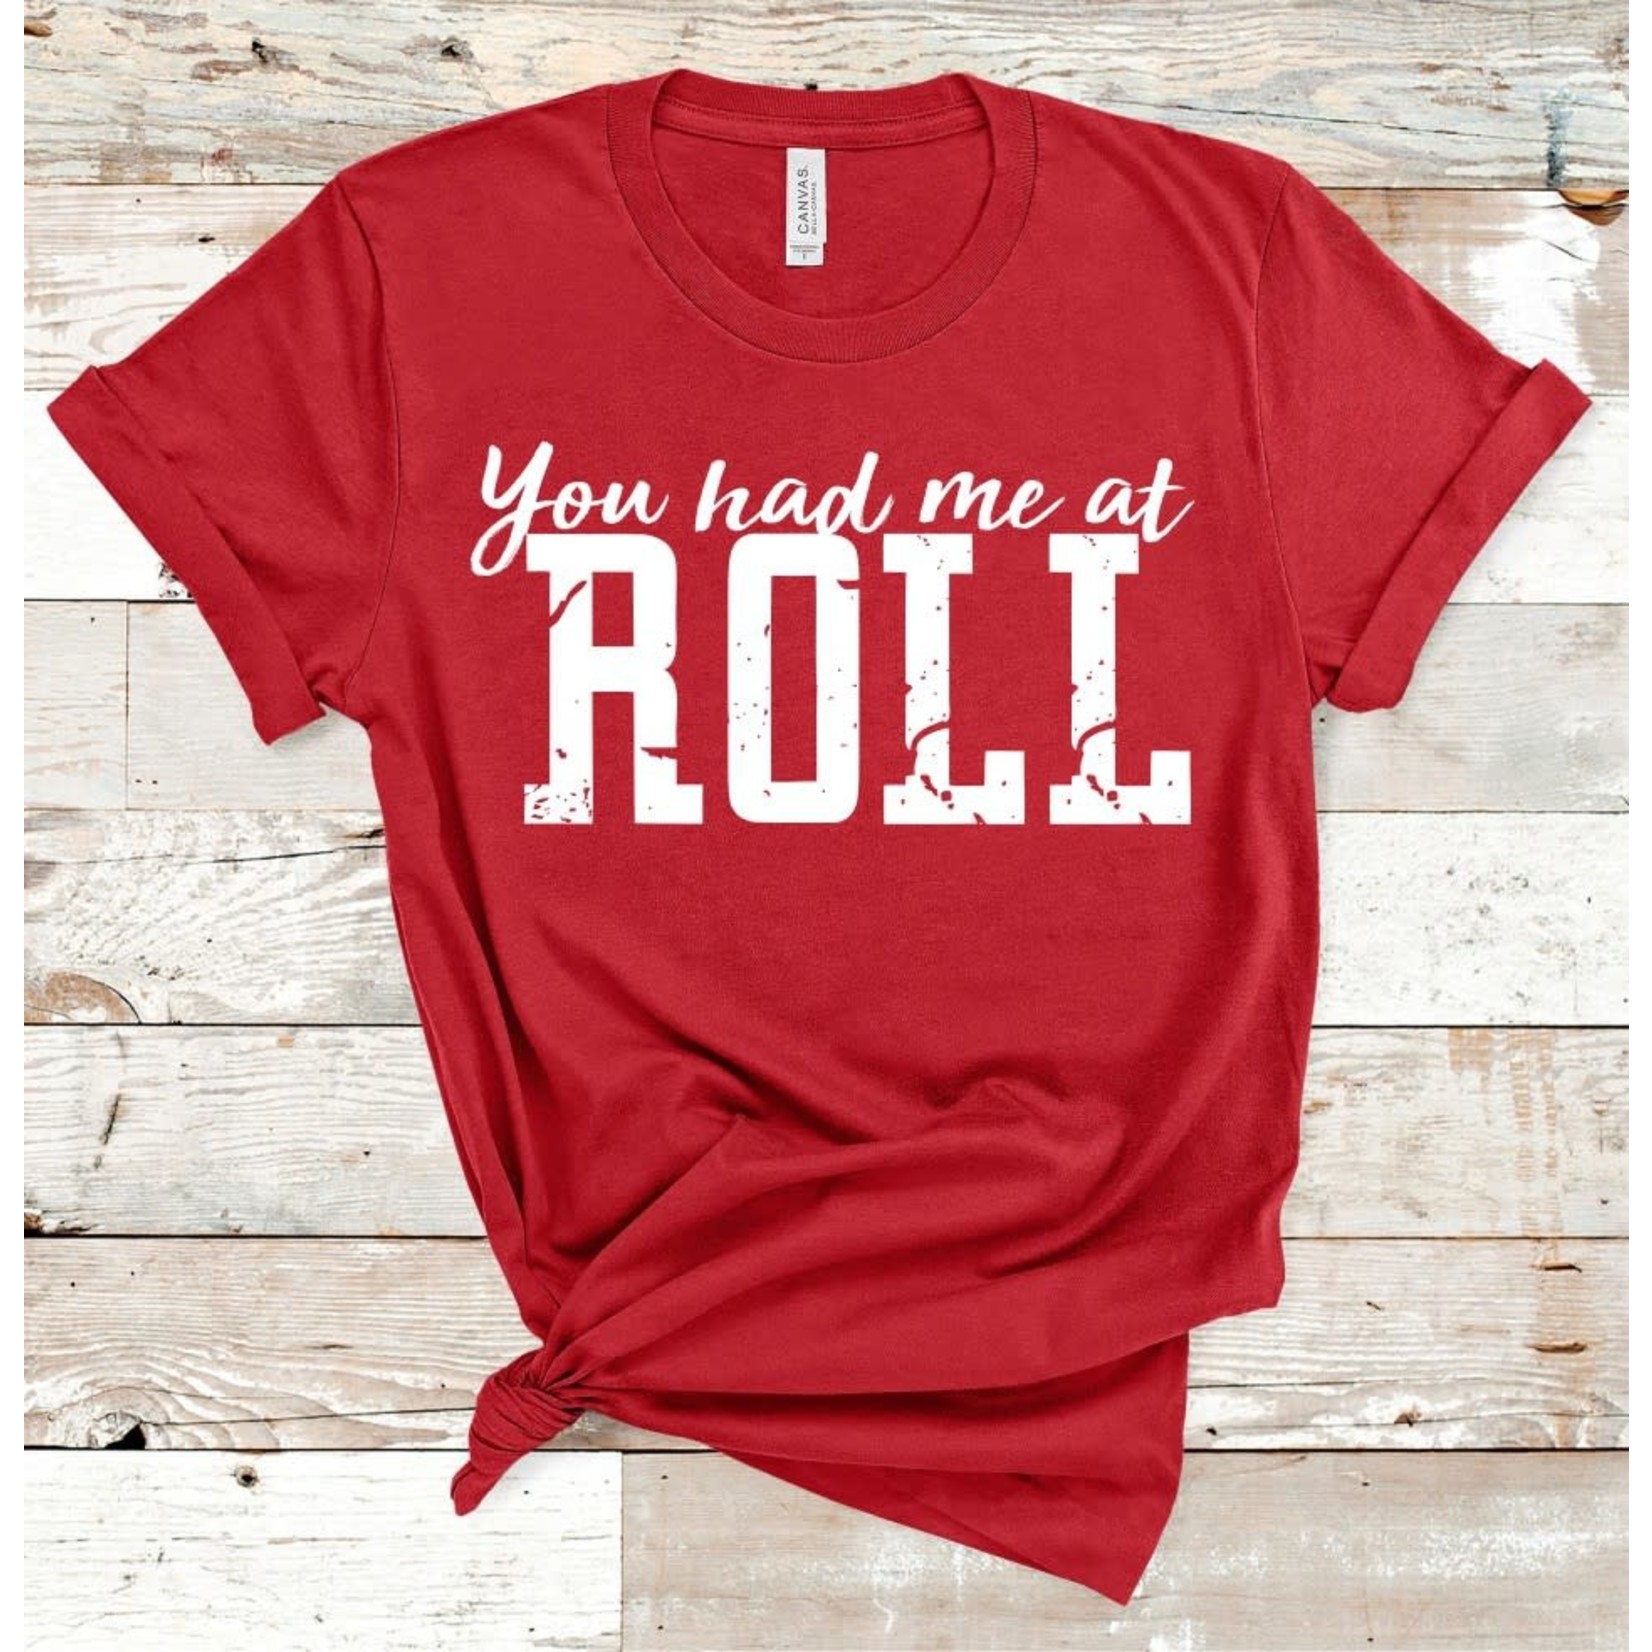 You had me at ROLL